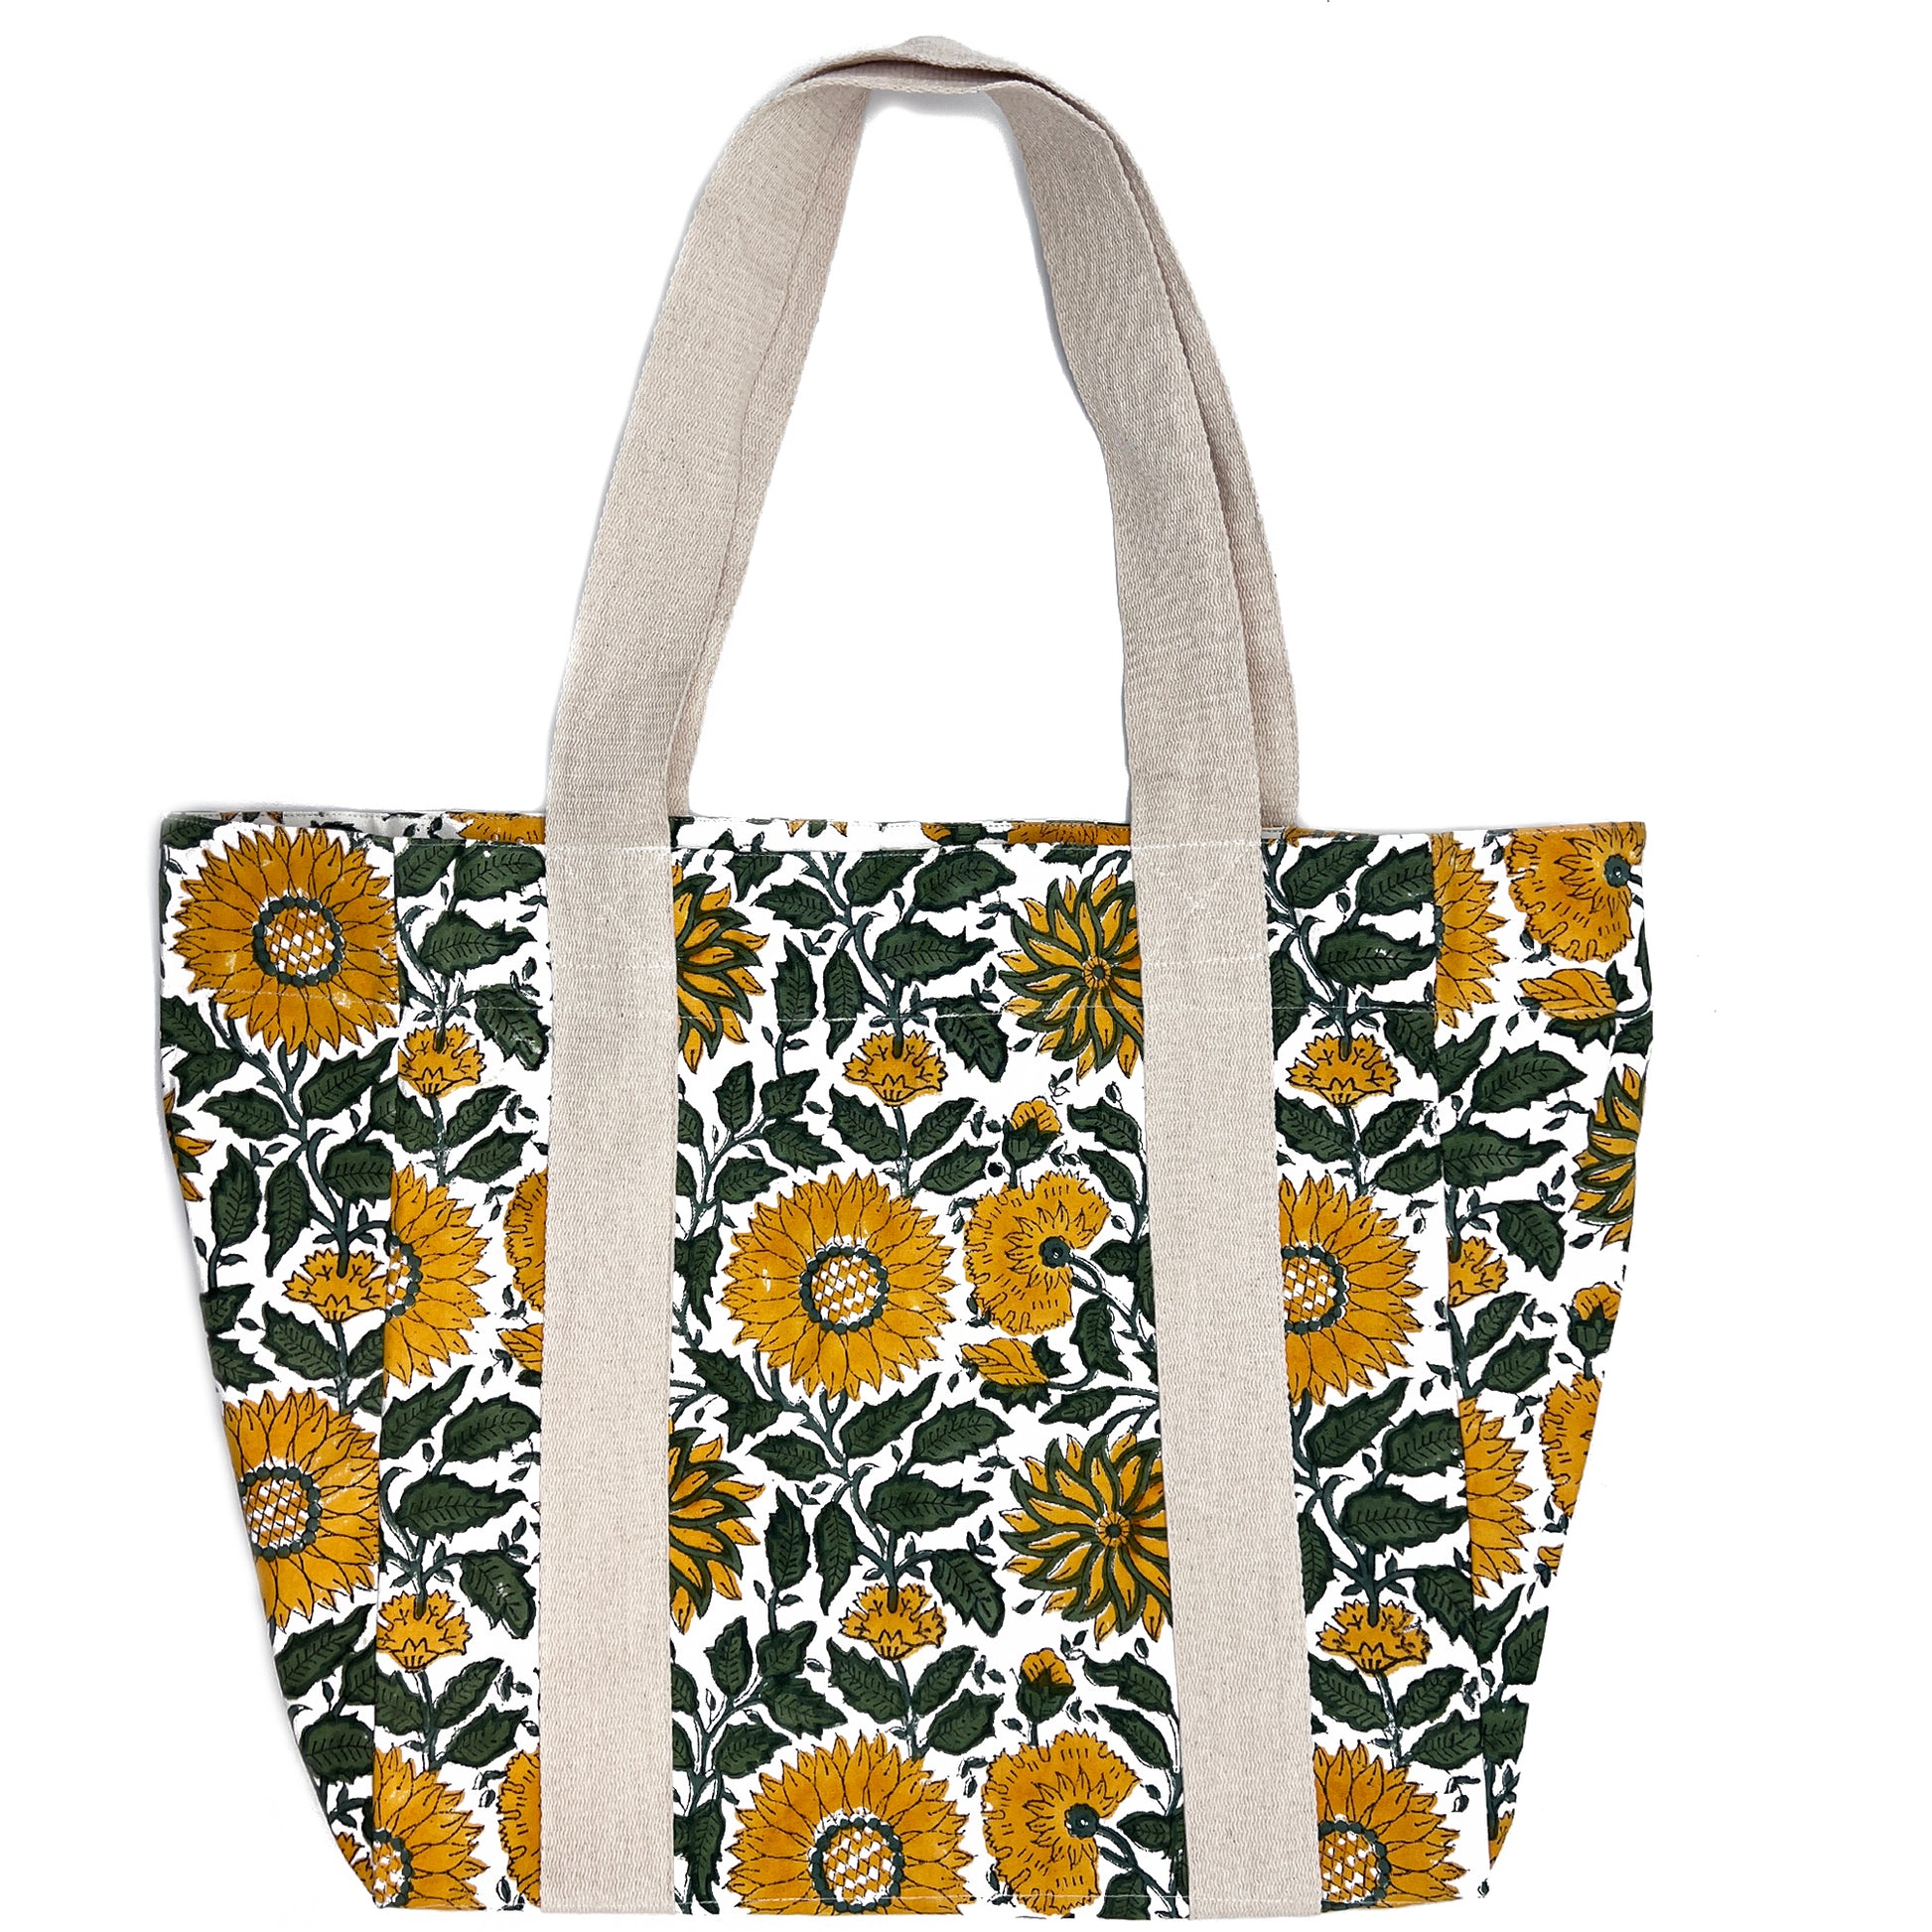 radiant sunflower canvas bag on a white background.